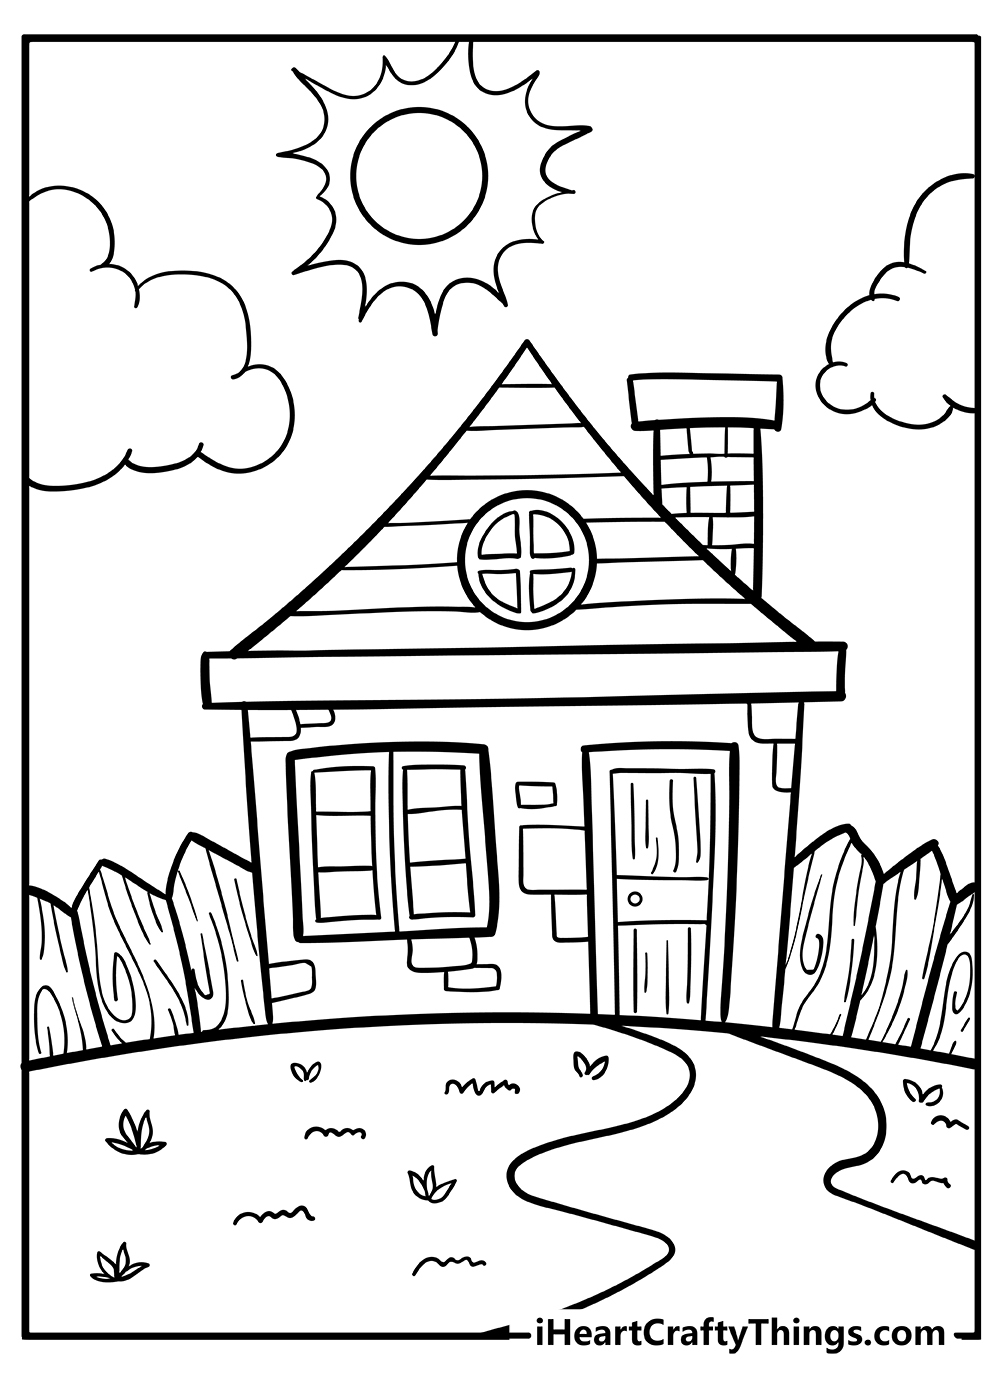 House Coloring Pages for adults free printable